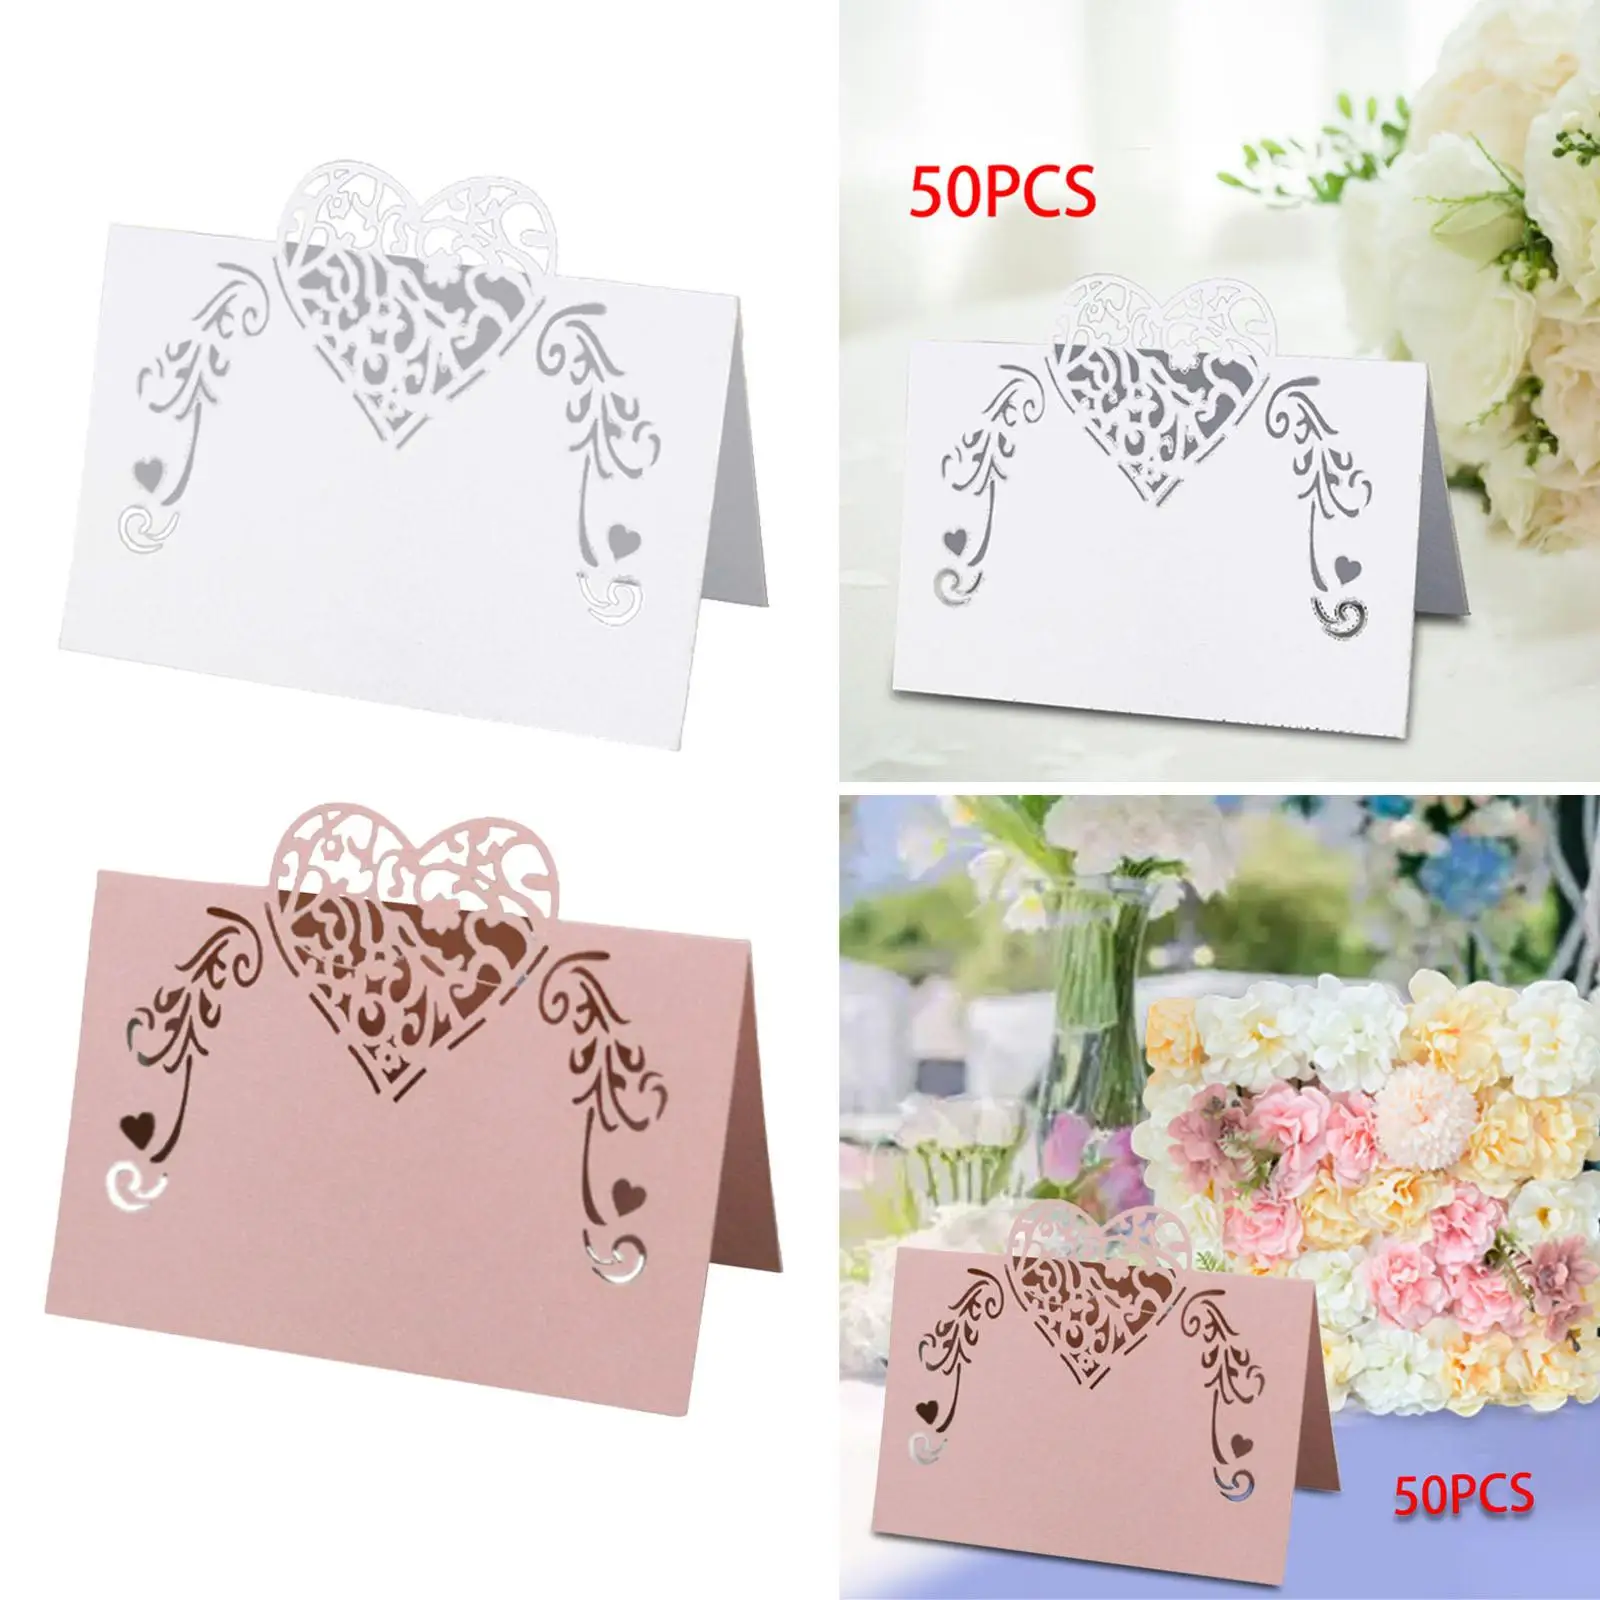 50Pcs Paper Place Cards Buffet Table Cards Tags Elegant Blank Greeting Cards for Reception Restaurant Restaurant Events Wedding